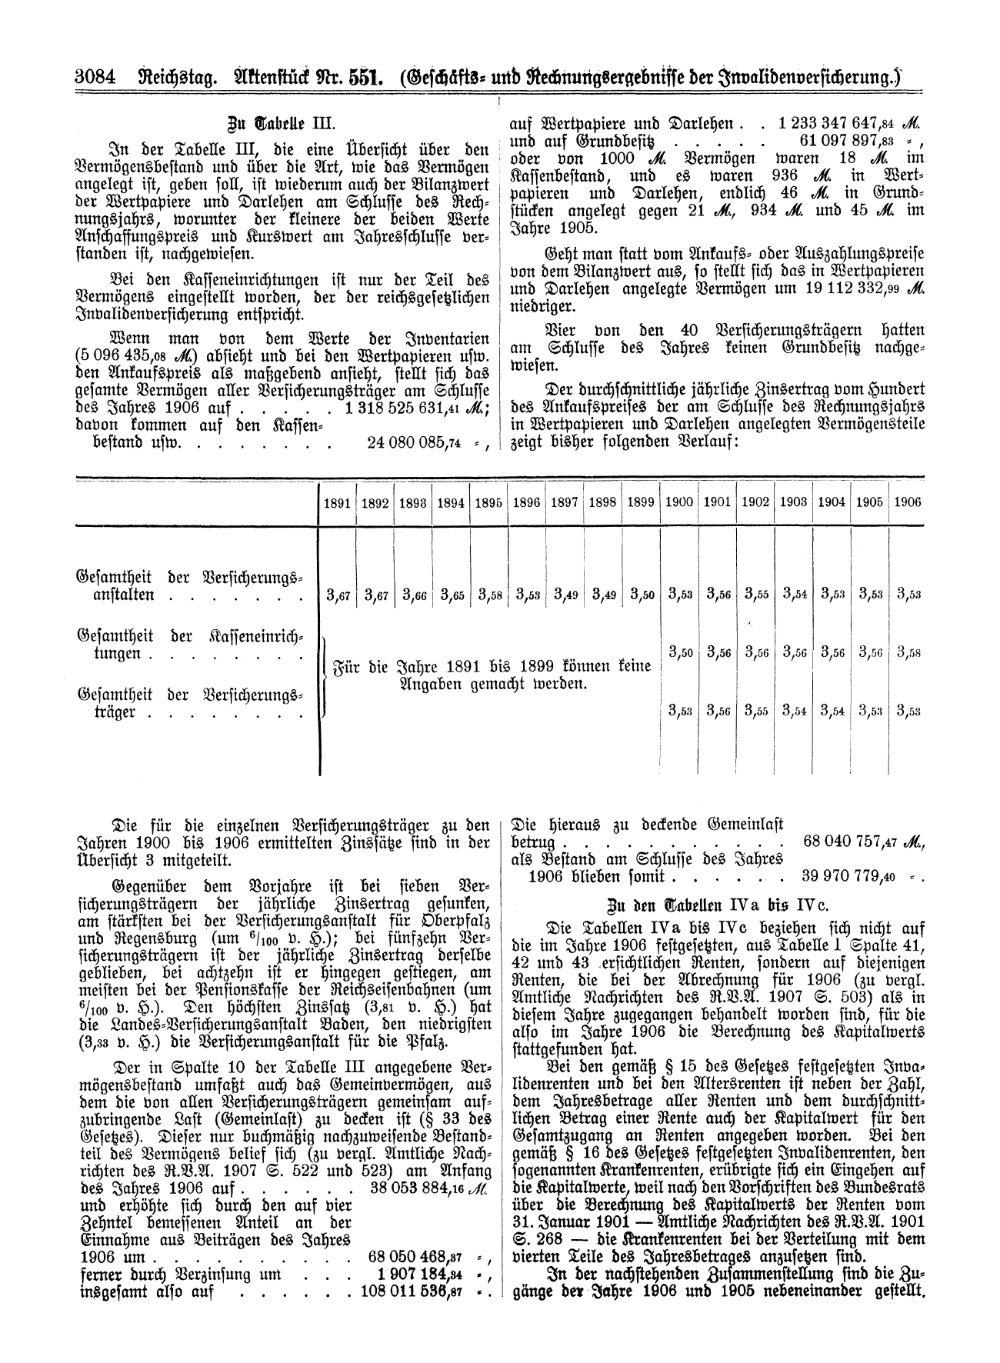 Scan of page 3084